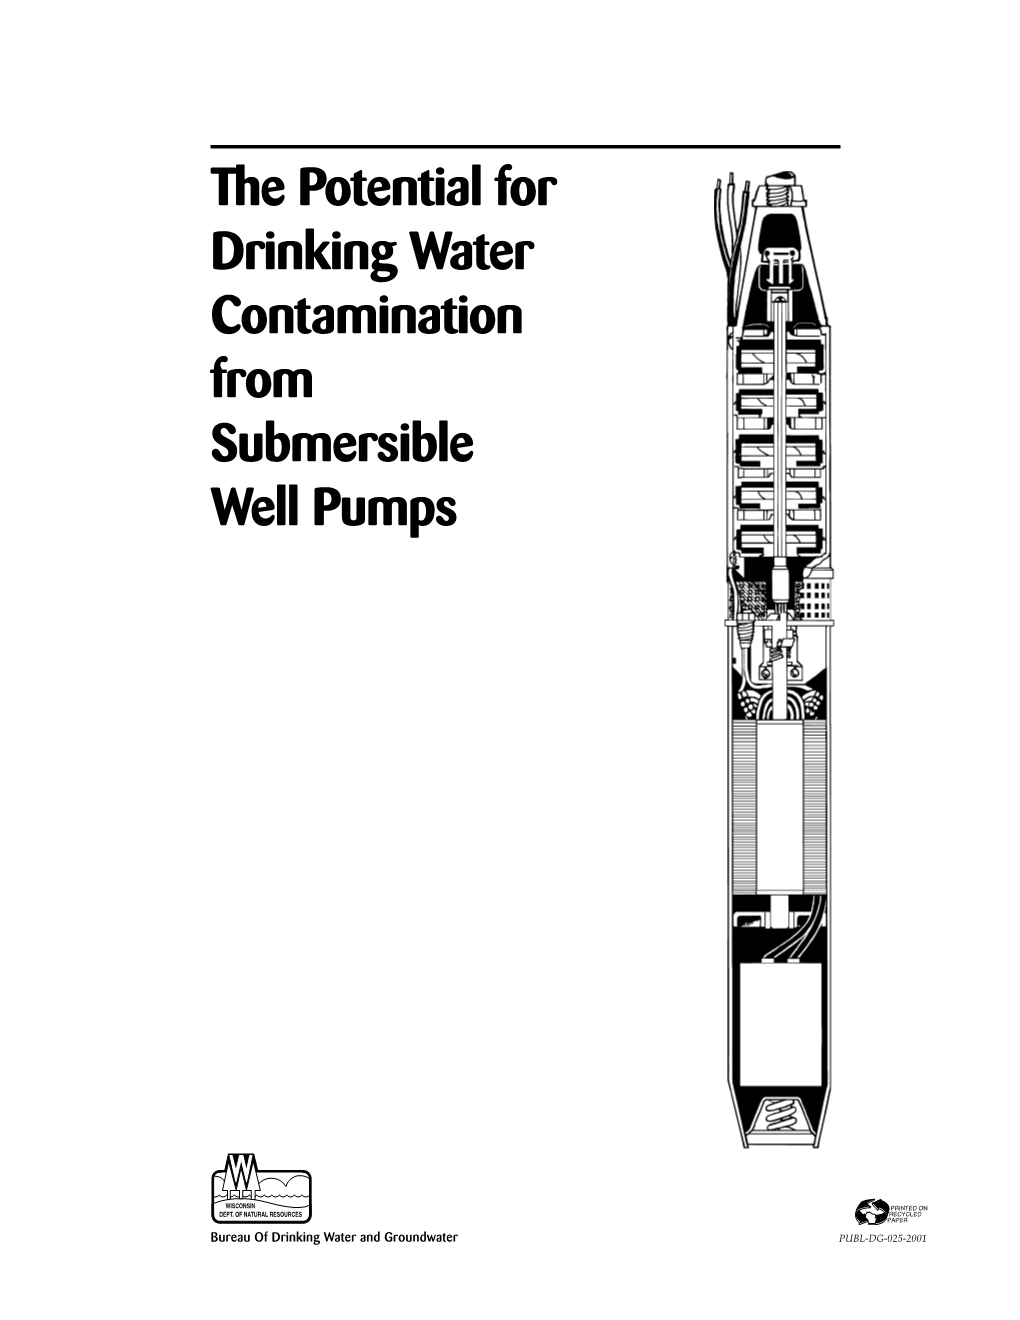 Submersible Well Pumps and Water Contamination